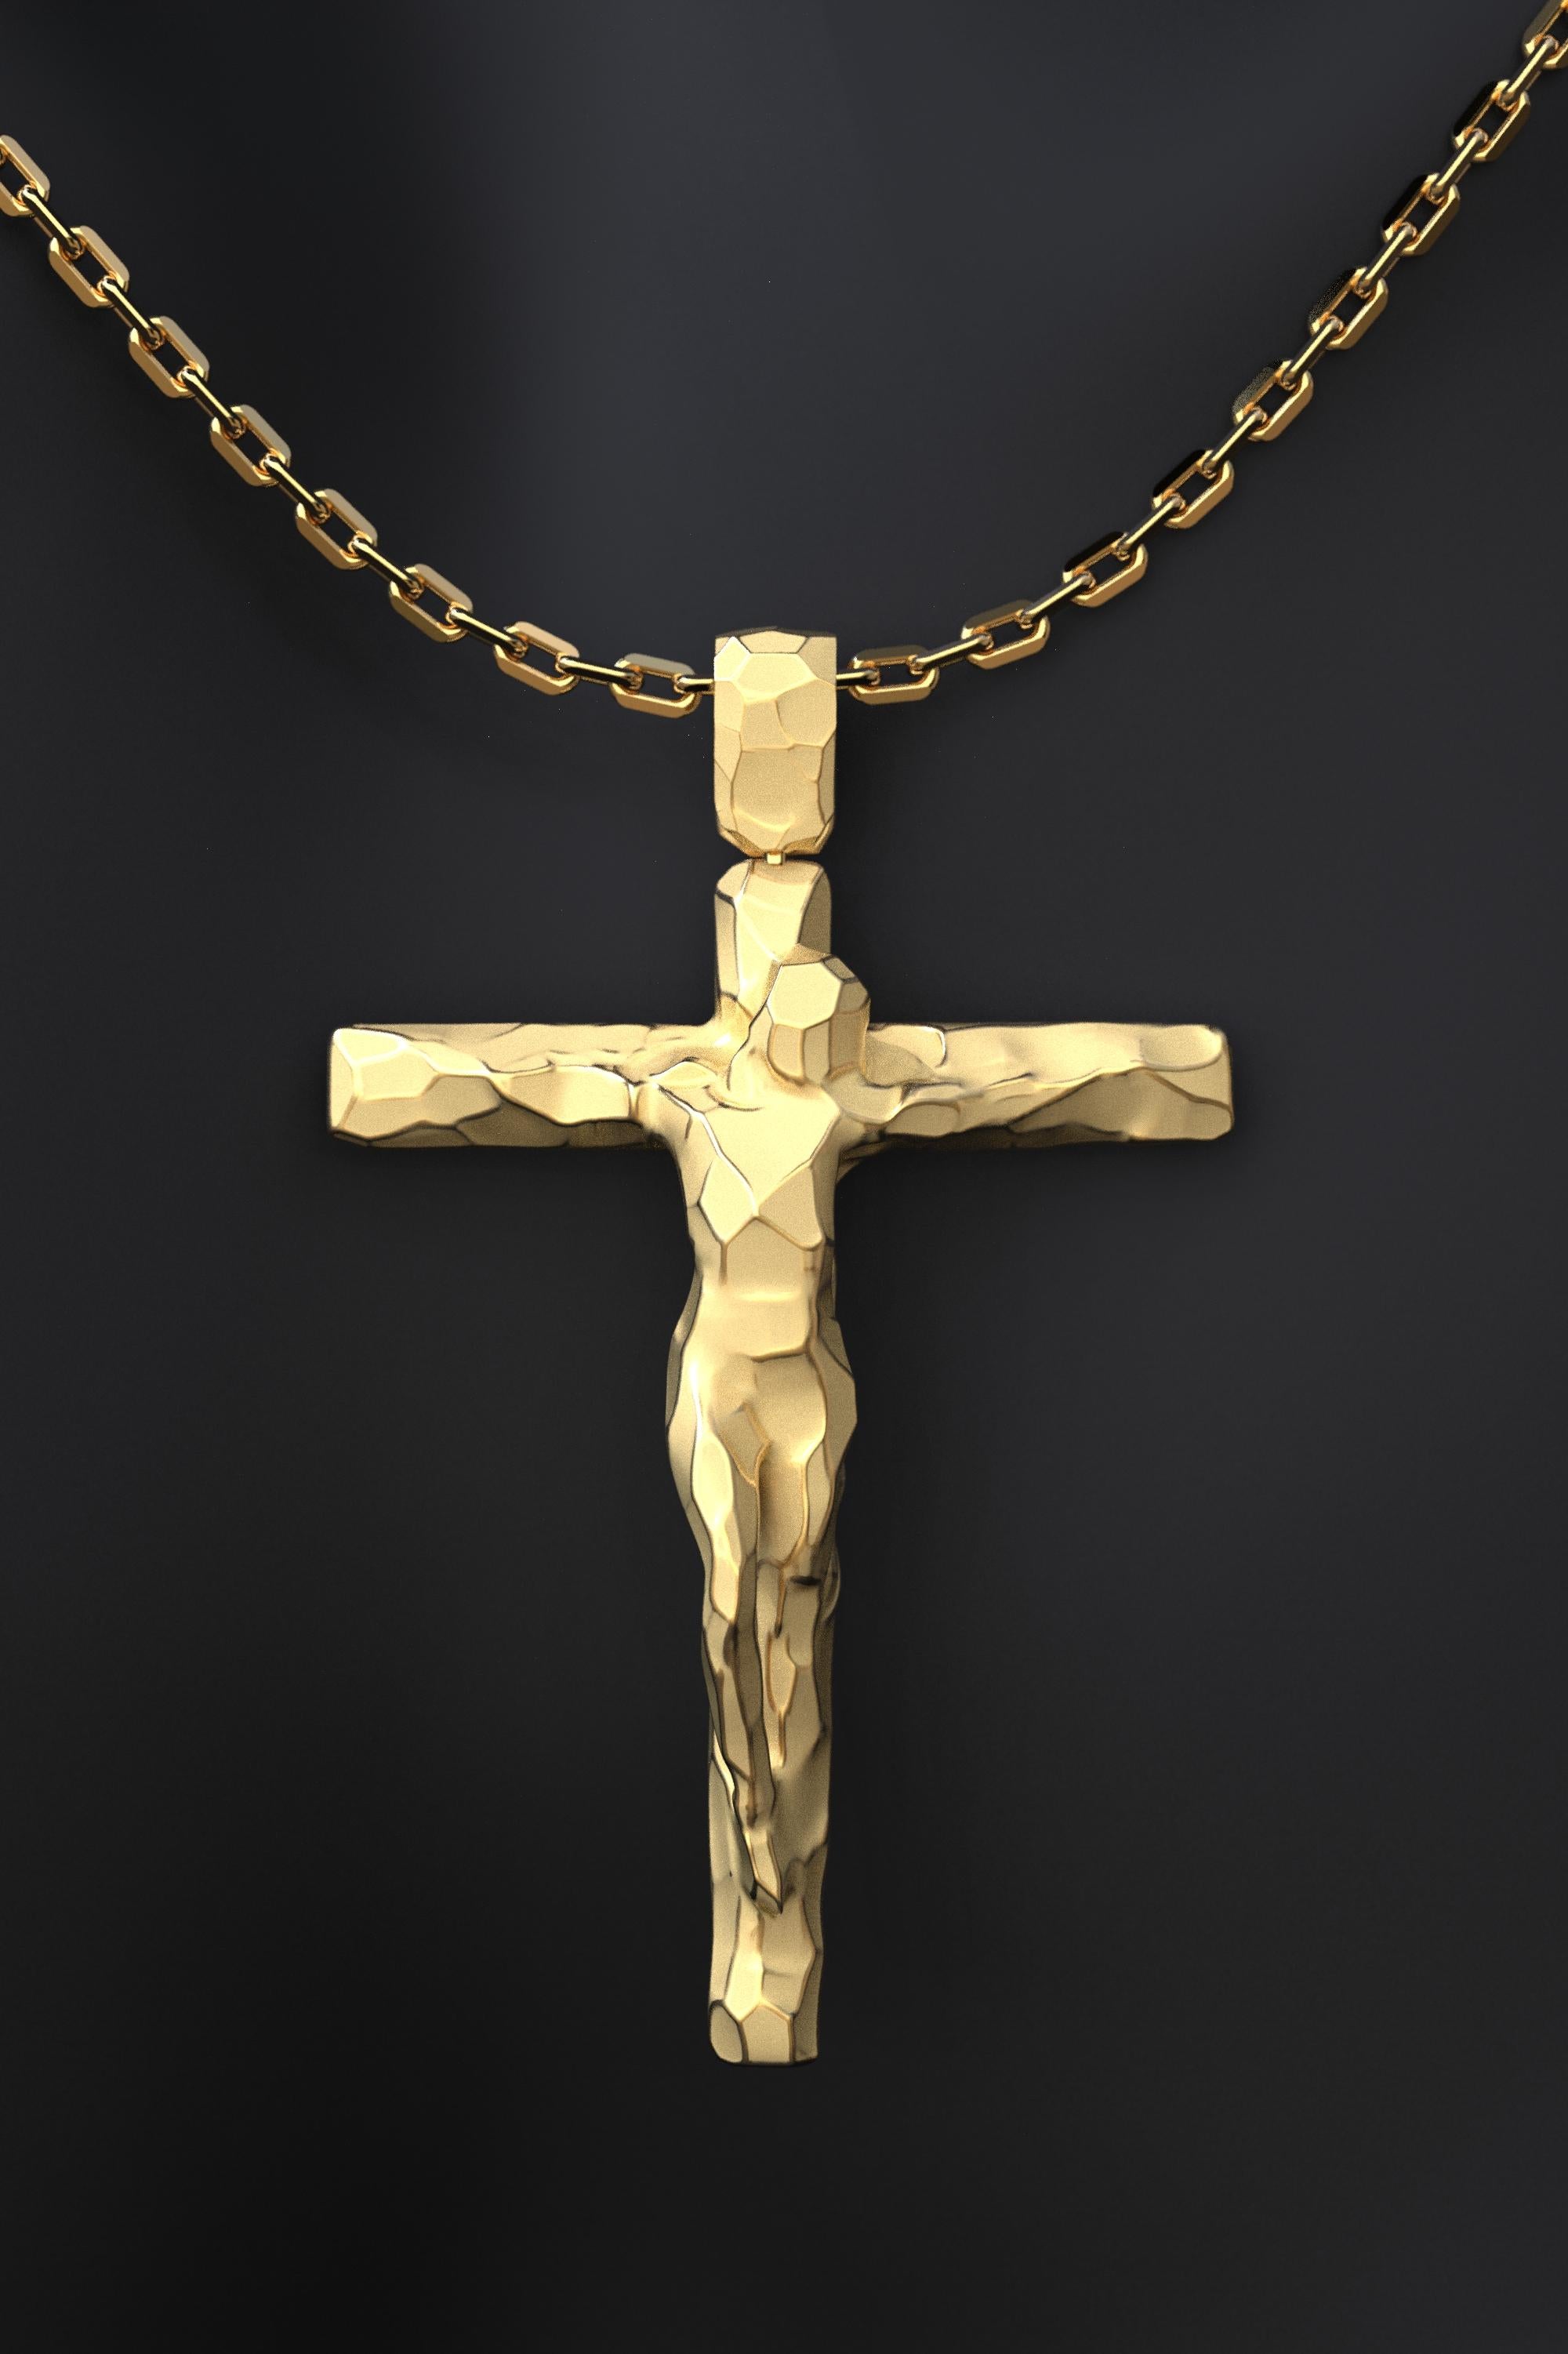 This made to order modern crucifix necklace is a beautiful and elegant way to express your faith. The crucifix is made of solid 18k gold and features a stylized design with a facetted surface. The cross is suspended from a sturdy Forzatina chain,